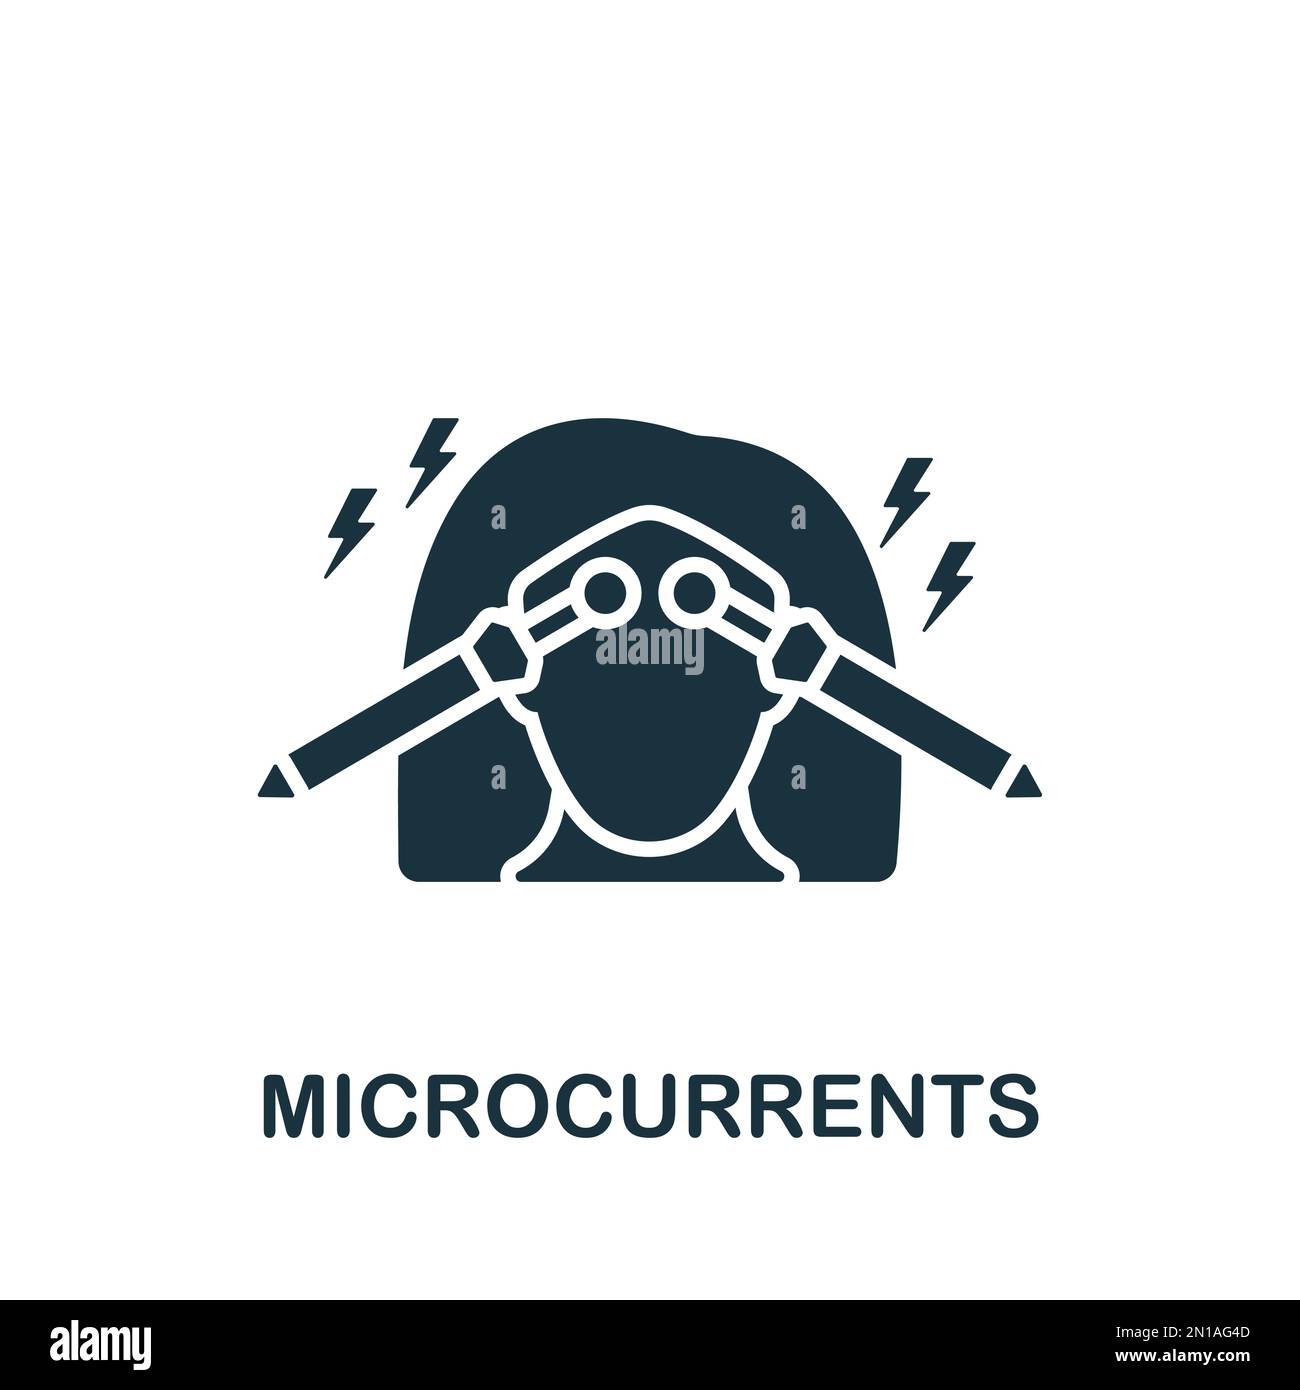 Microcurrents icon. Monochrome simple sign from cosmetology collection. Microcurrents icon for logo, templates, web design and infographics. Stock Vector